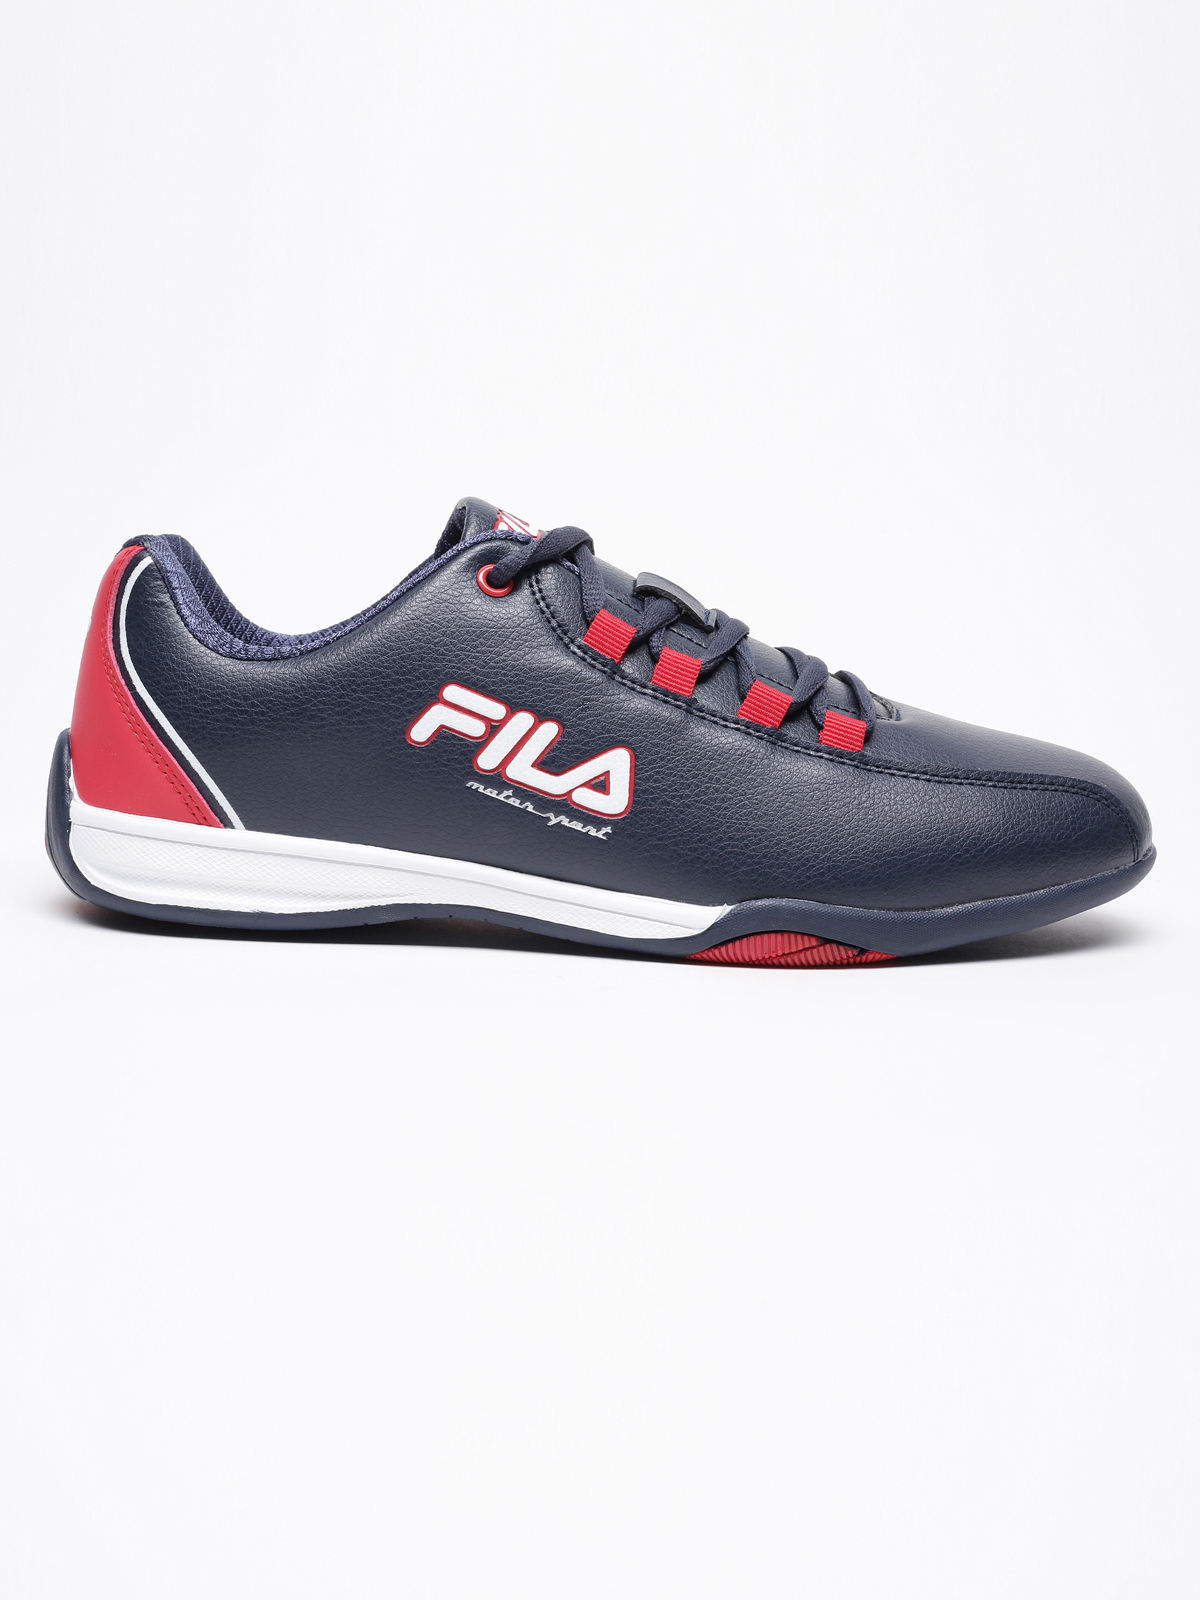 In conversation with Abdon Lepcha about FILA Motorsport Collection